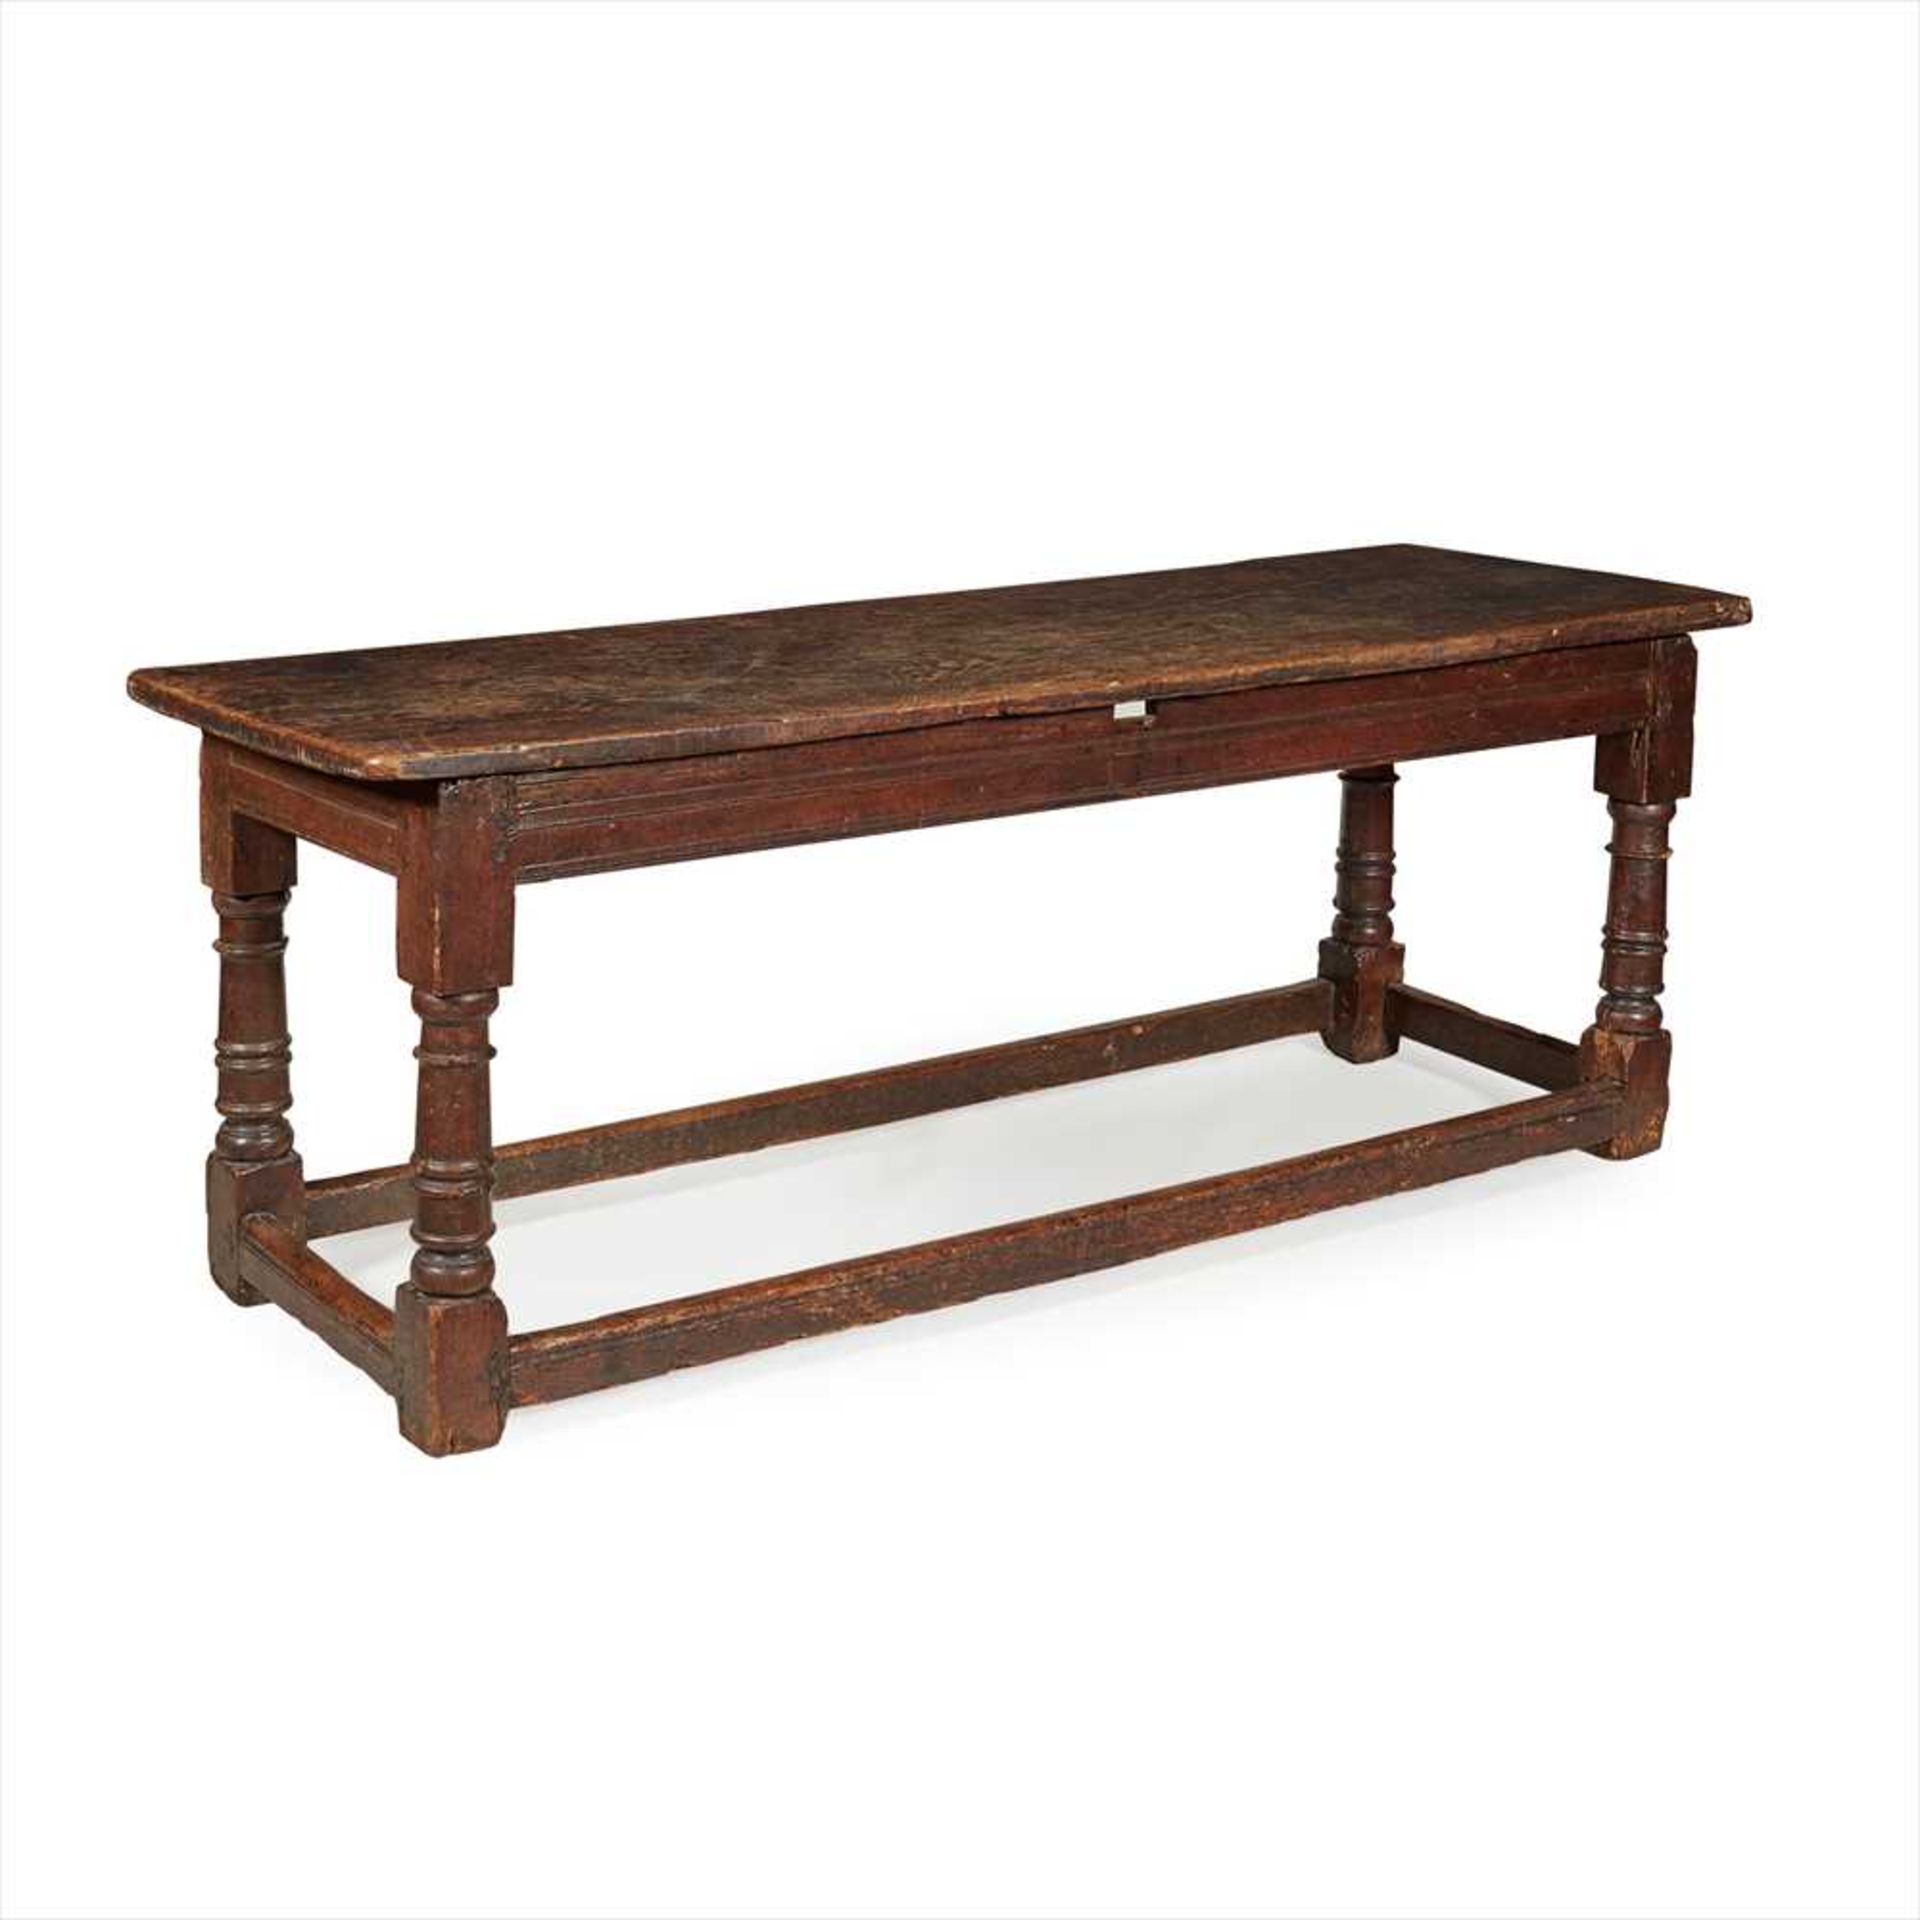 OAK REFECTORY TABLE EARLY 18TH CENTURY